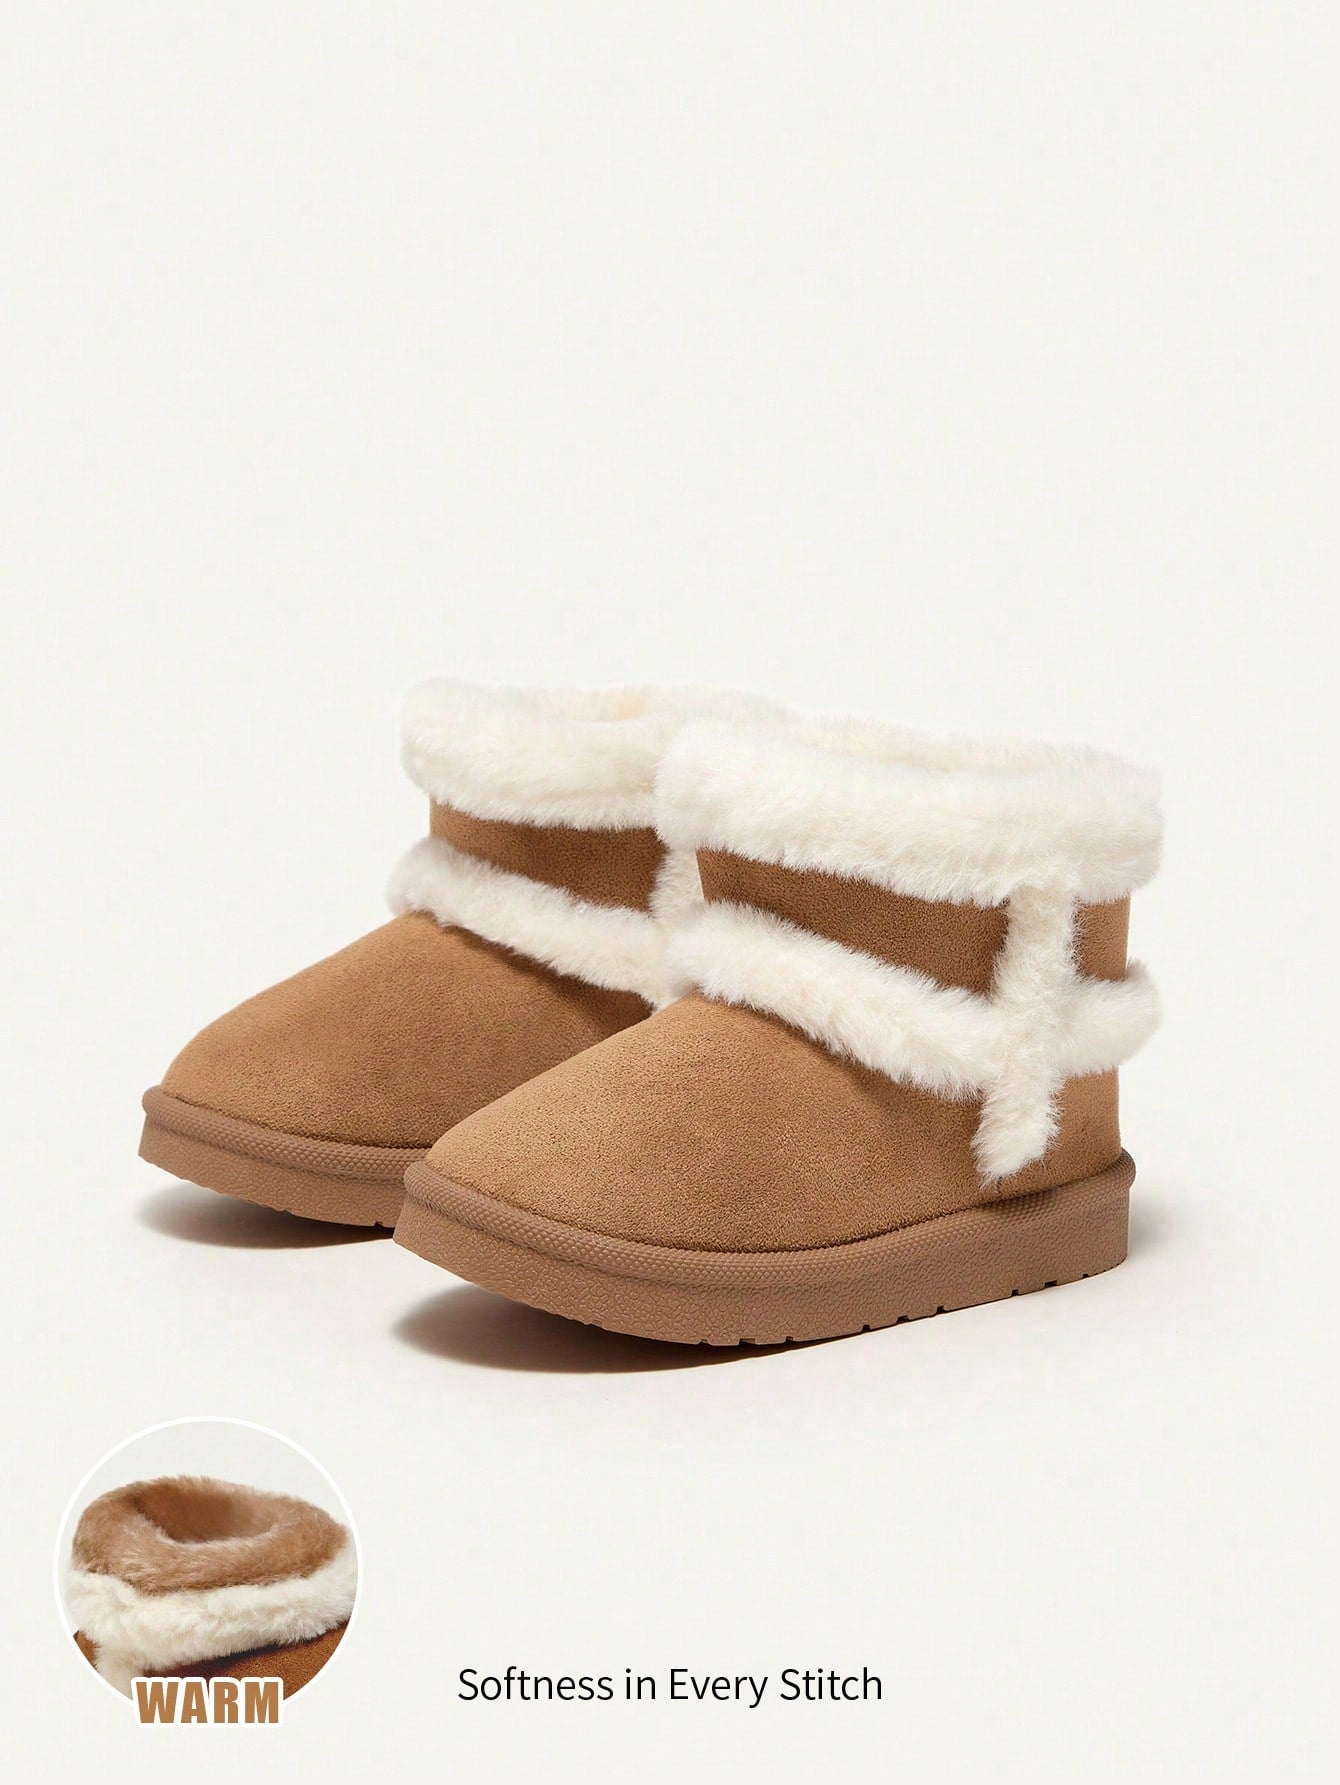 Boys' Stylish Camel-colored Plush Snow Boots, Comfortable And Warm